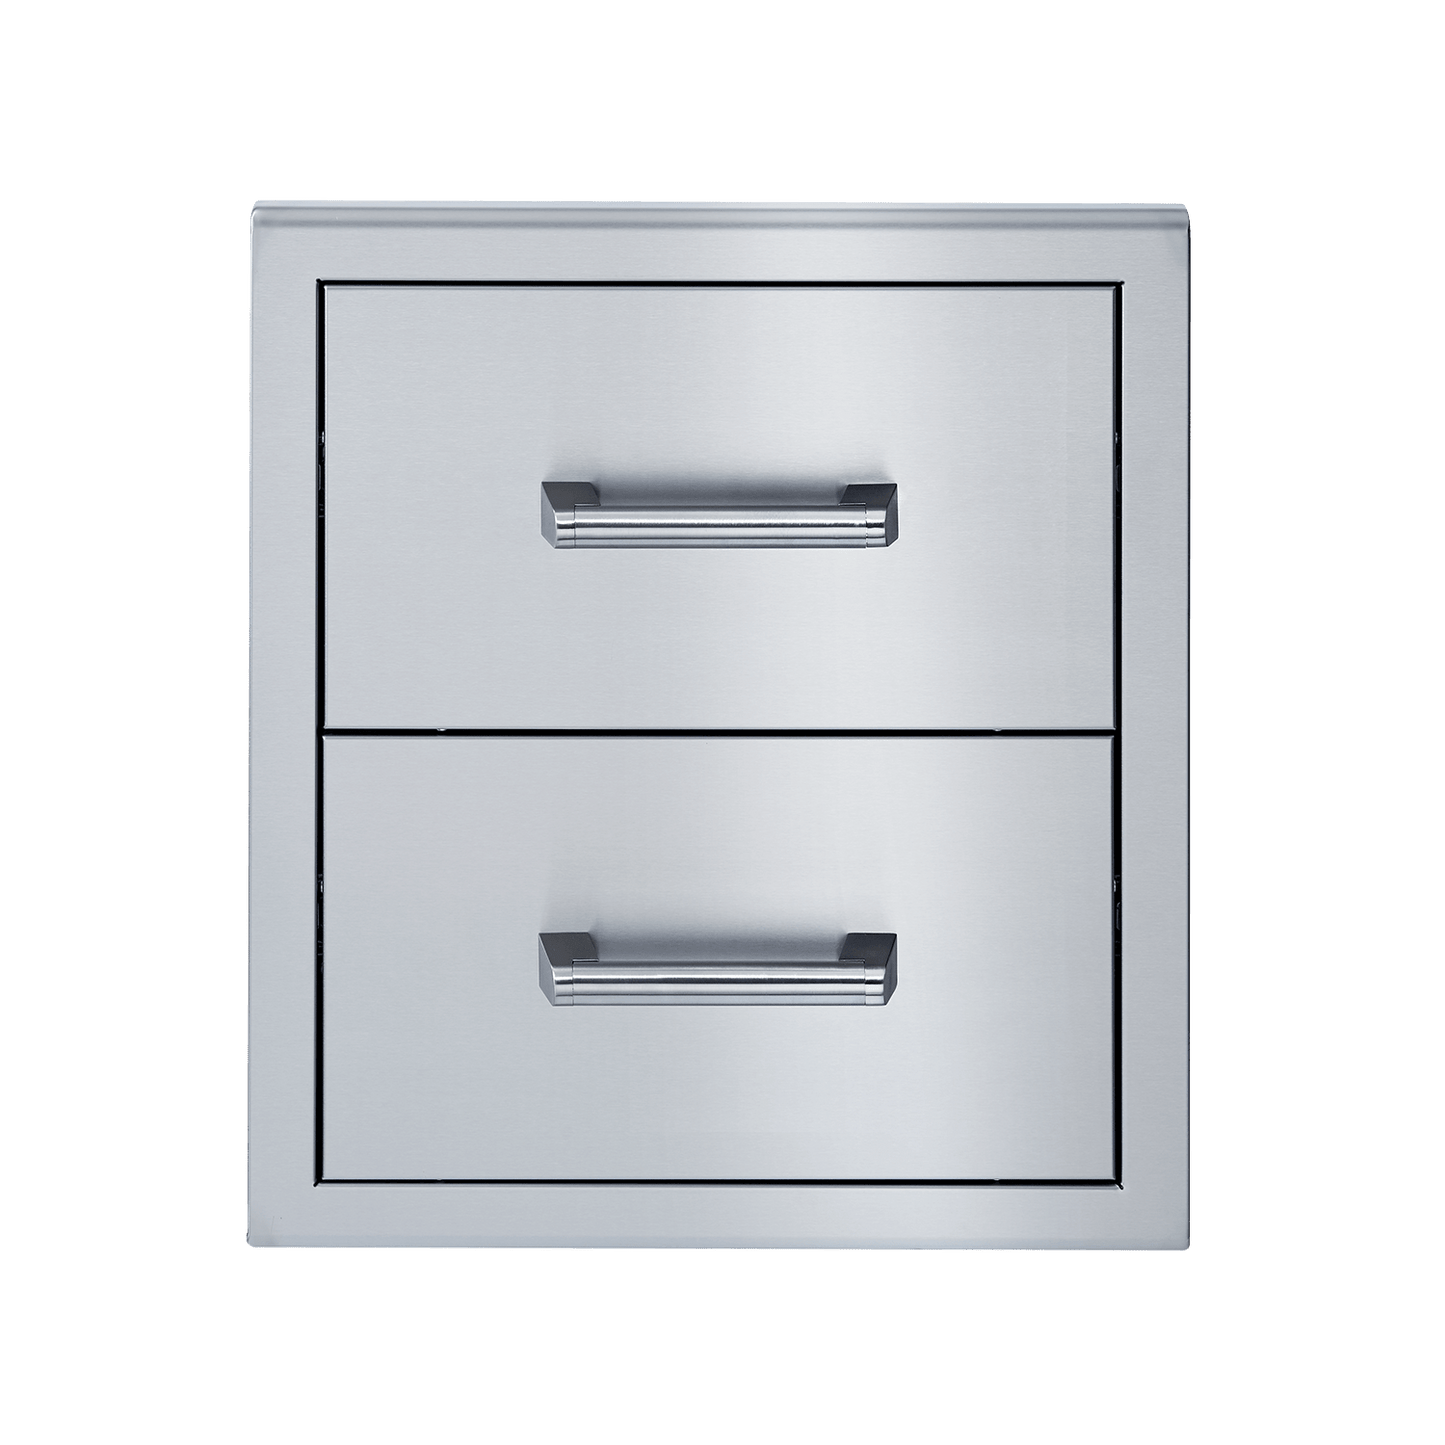 Broilmaster 22" x 20" Stainless Steel Built-In Double Drawer